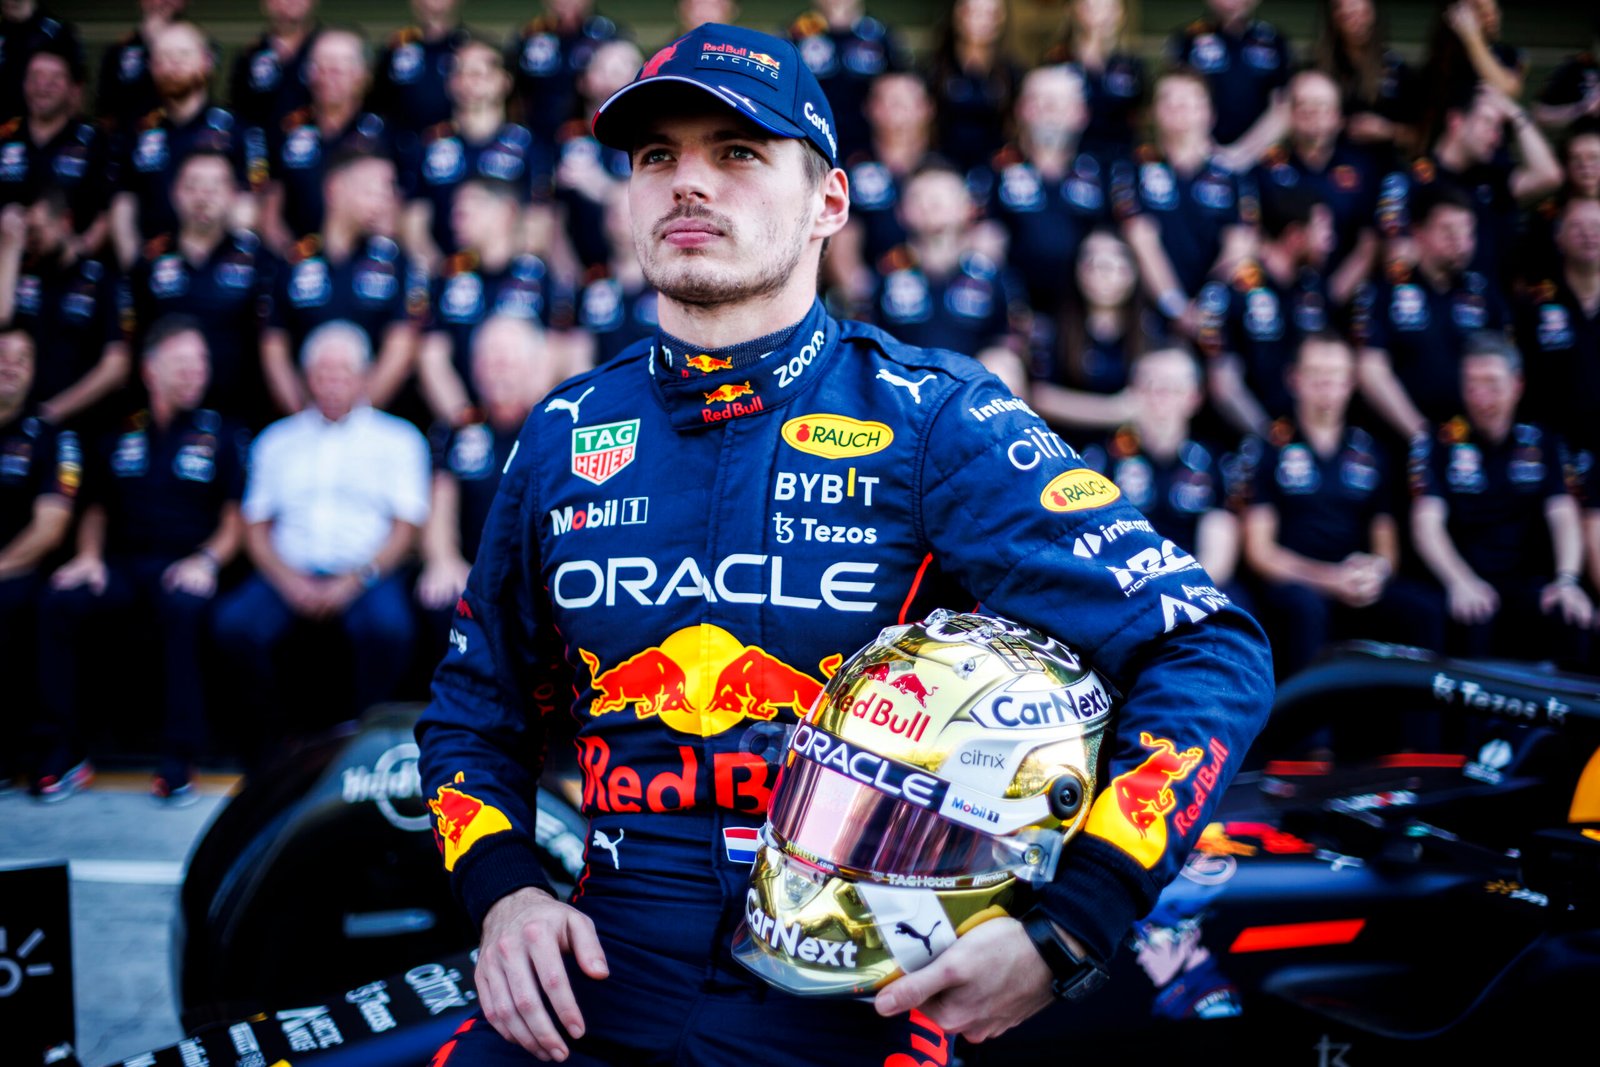 TAG HEUER CONGRATULATES MAX VERSTAPPEN AND THE ORACLE RED BULL RACING TEAM ON THEIR DOUBLE FORMULA 1 WORLD CHAMPIONSHIP WINS